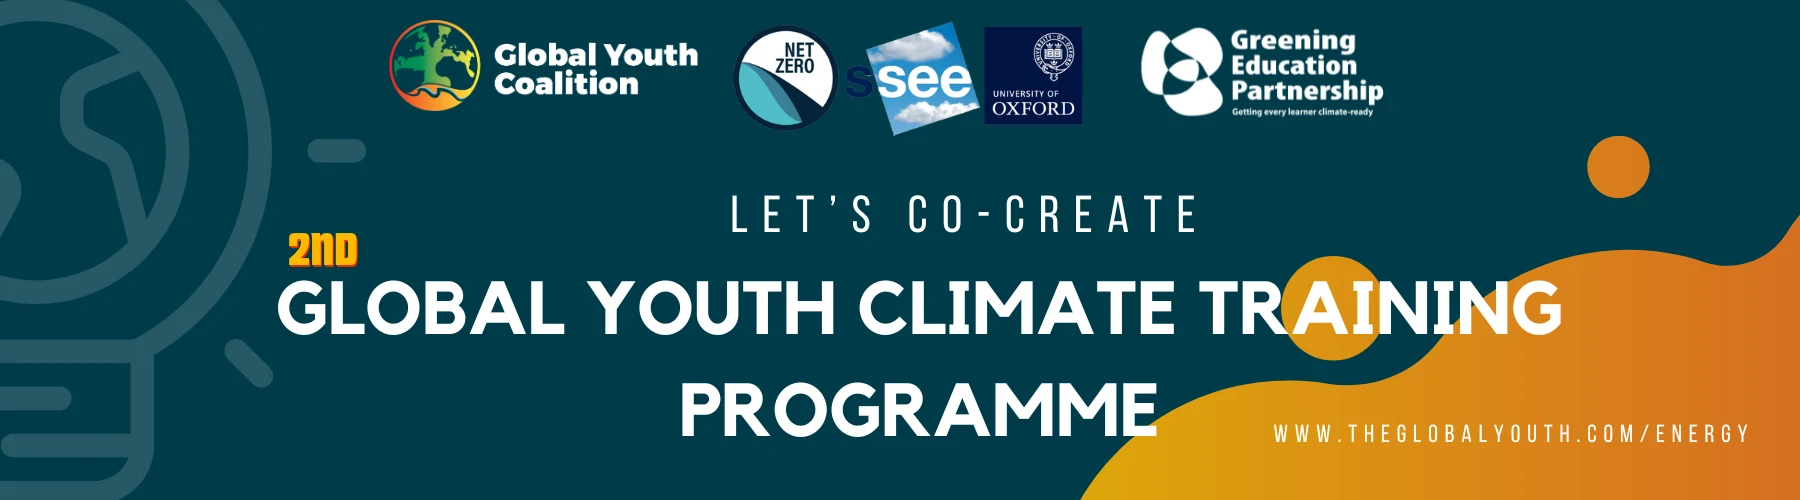 Global Youth Climate Training Programme